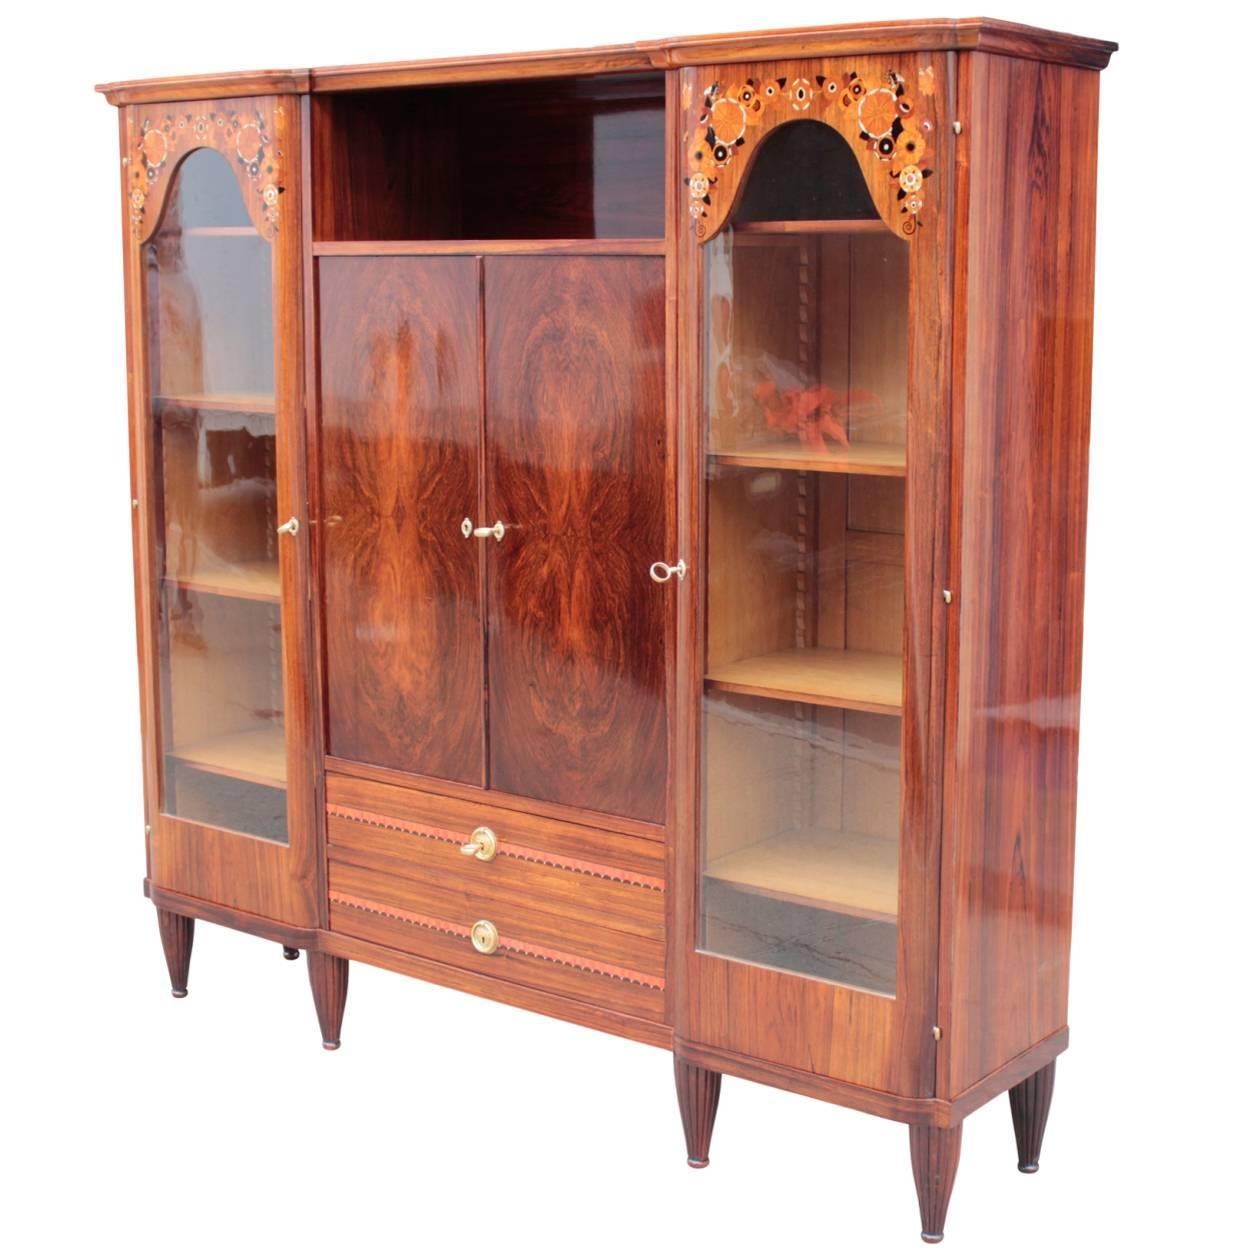 French Early Art Deco Vitrine Bookcase, attributed to Maurice Dufrene For Sale